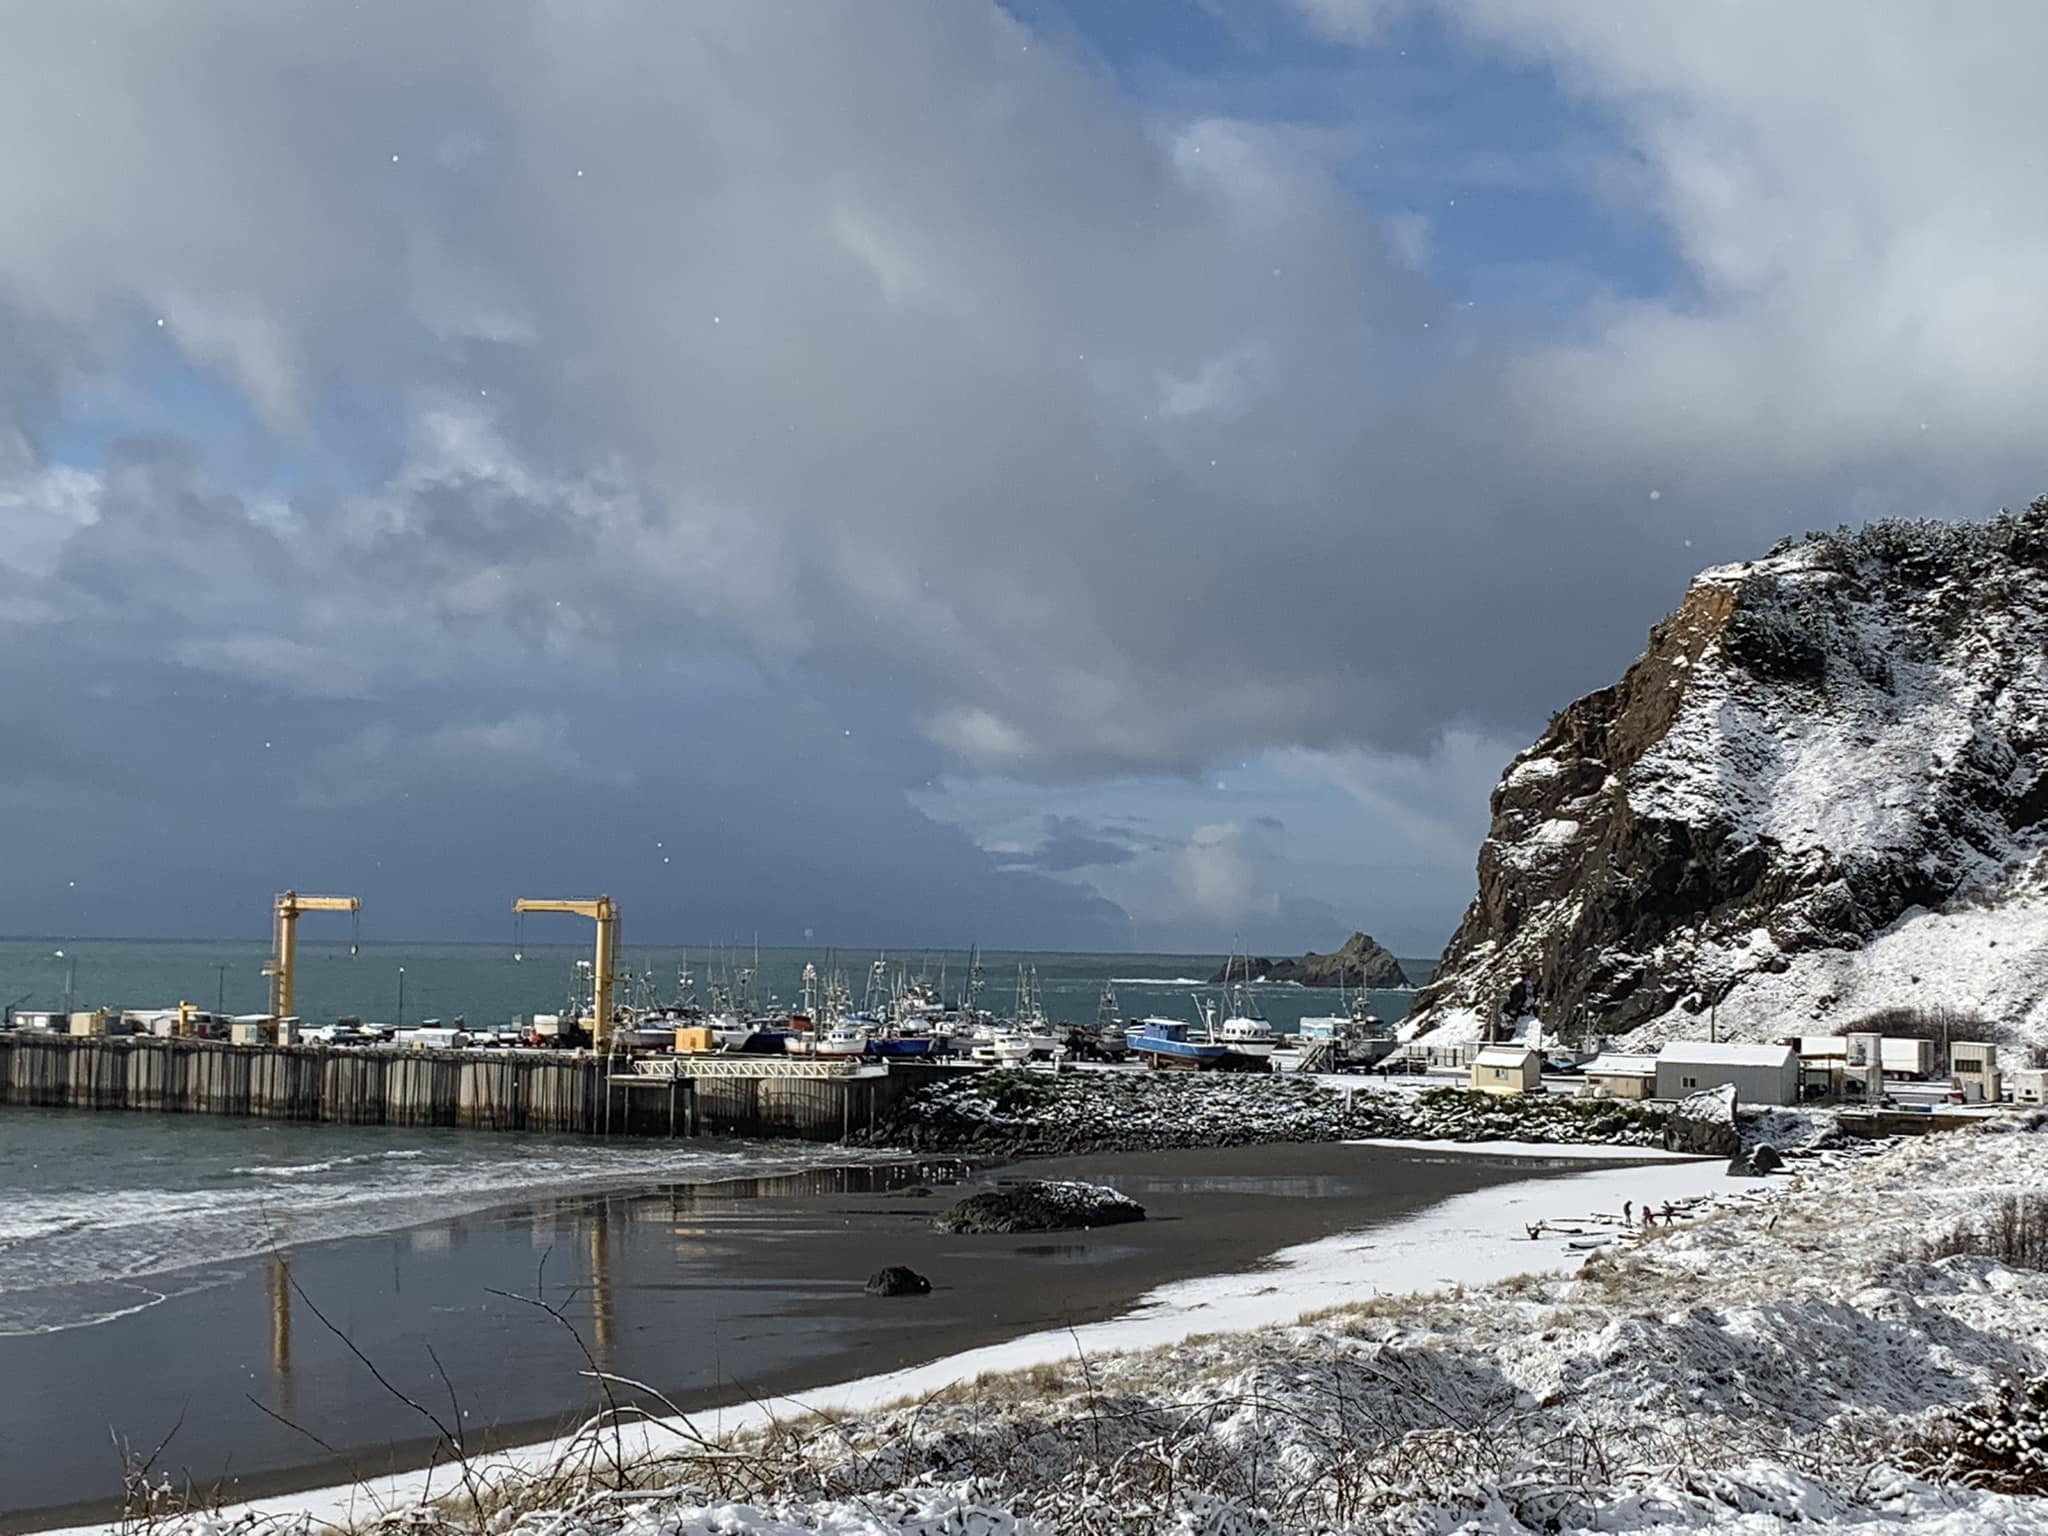 Snow in February 2023 at the Port of Port Orford, Oregon